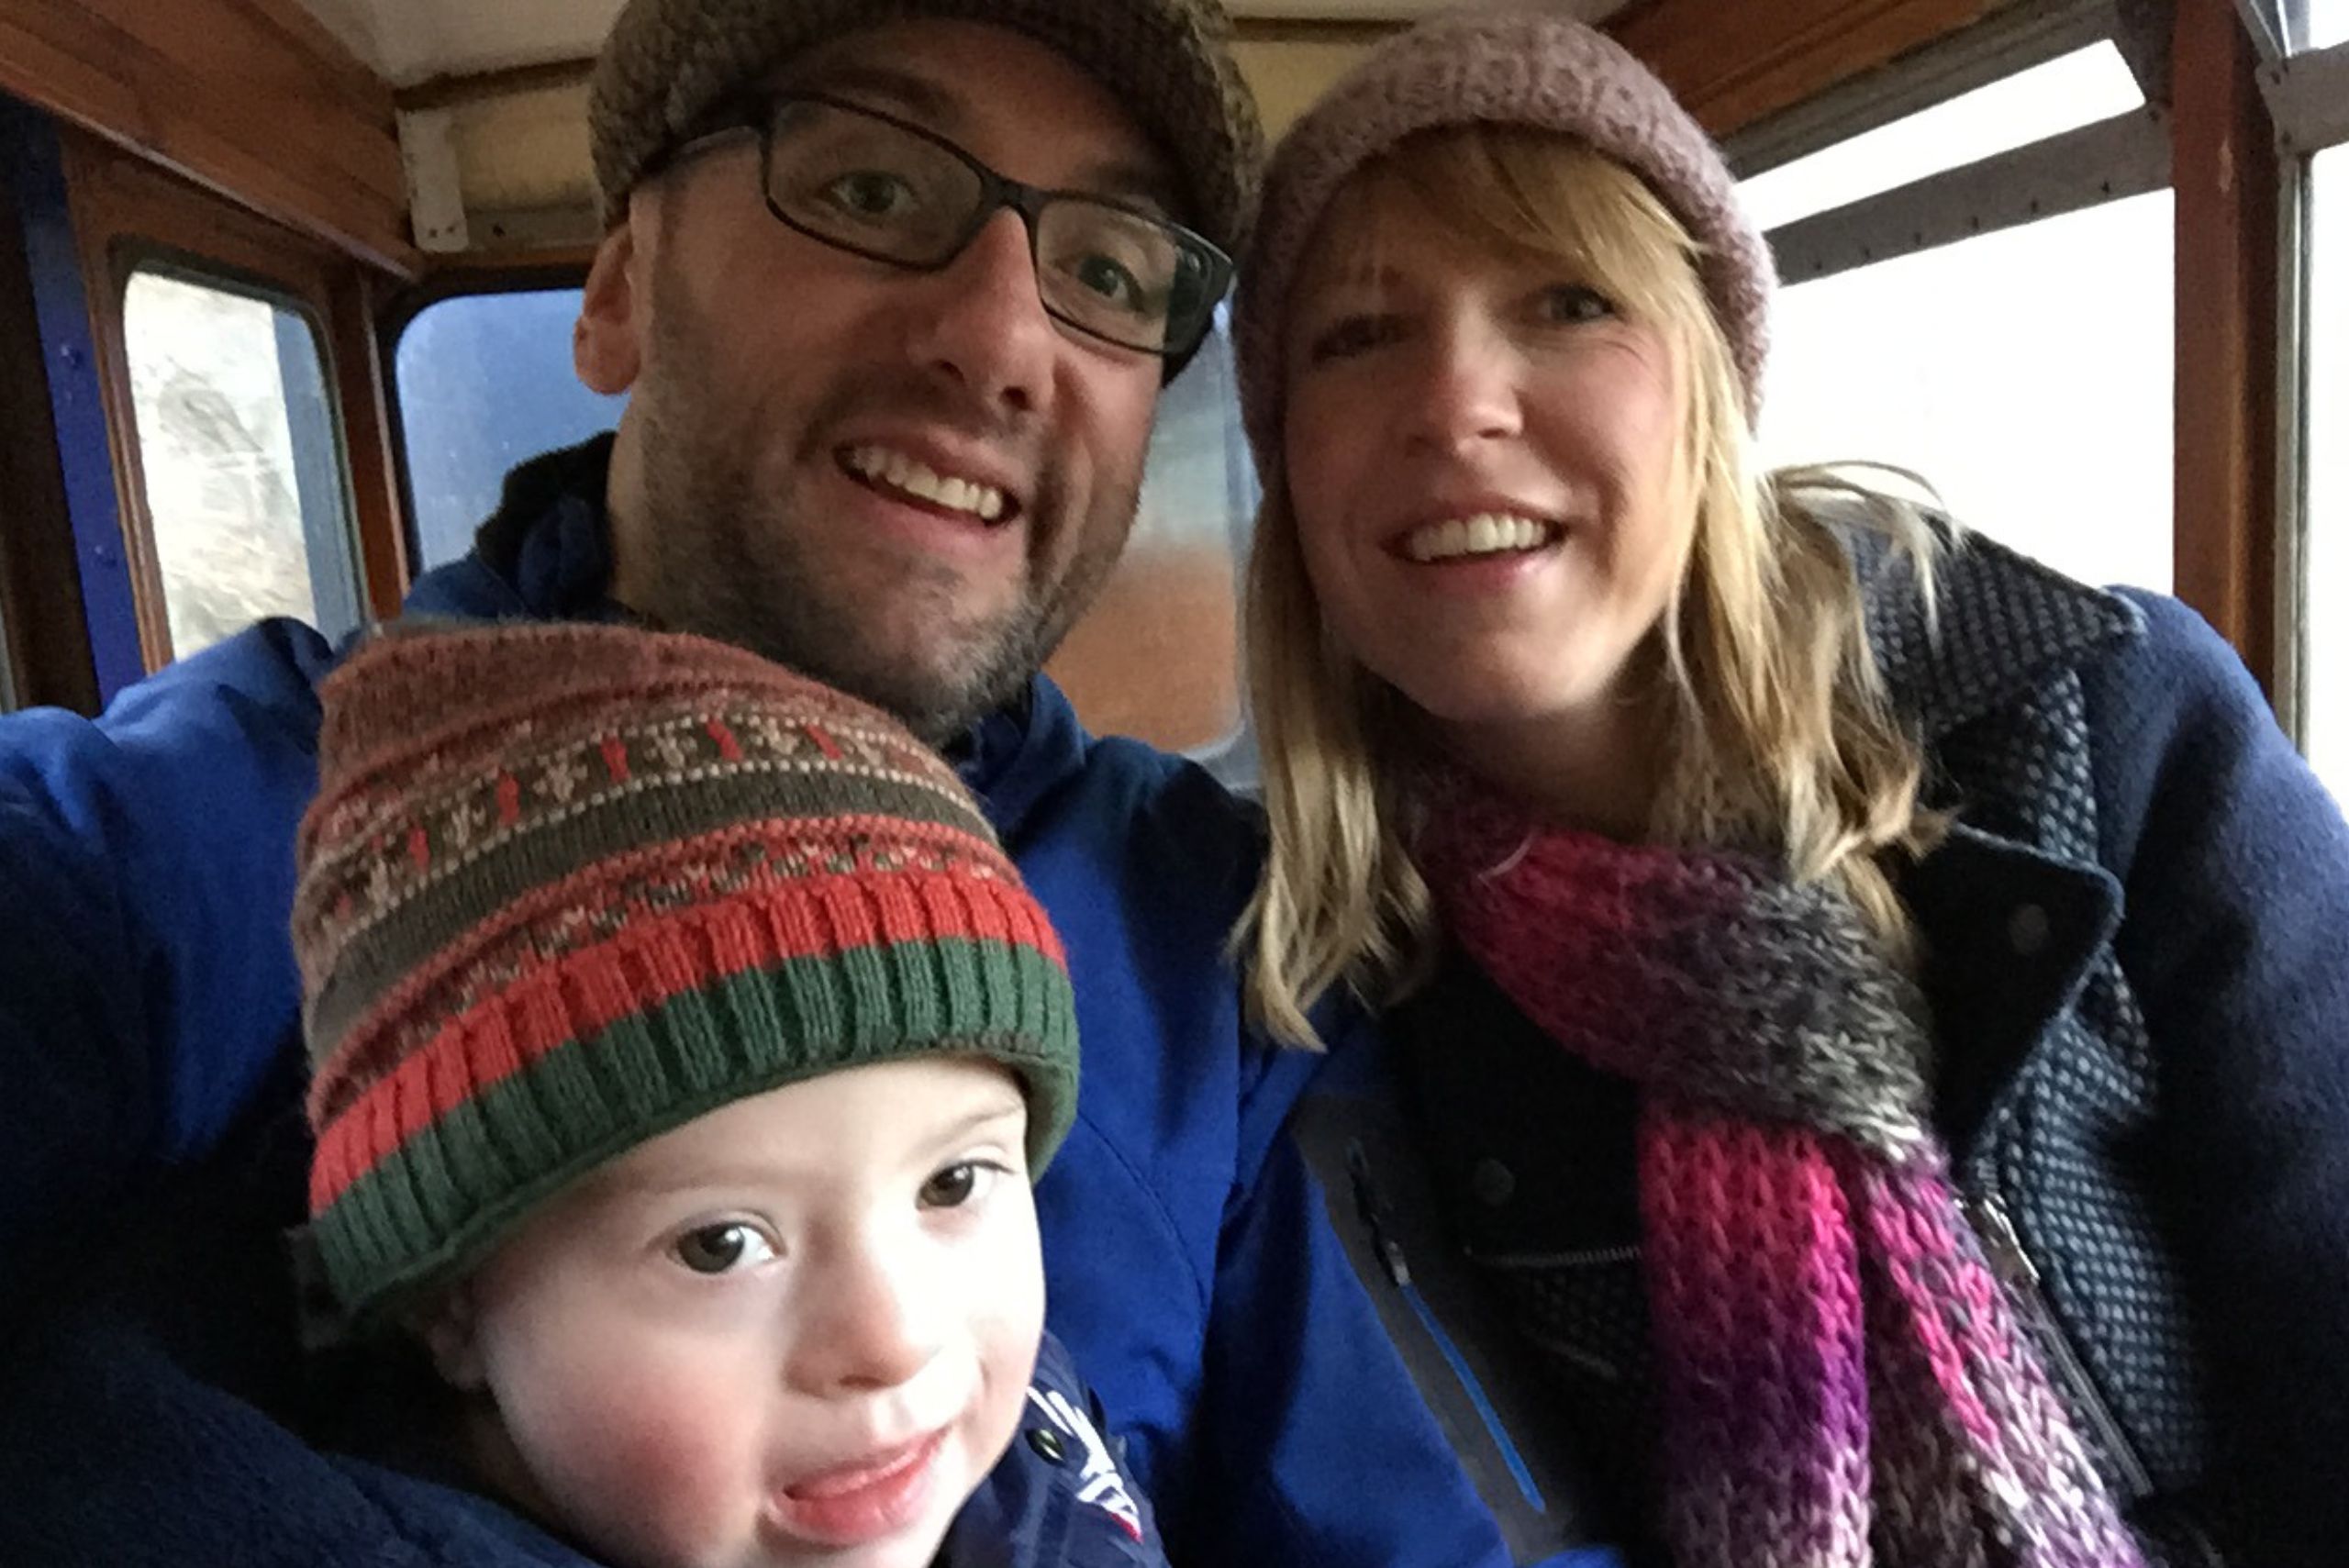 A well-wrapped up family, mum, dad and son (who has Down's syndrome) in a carriage.